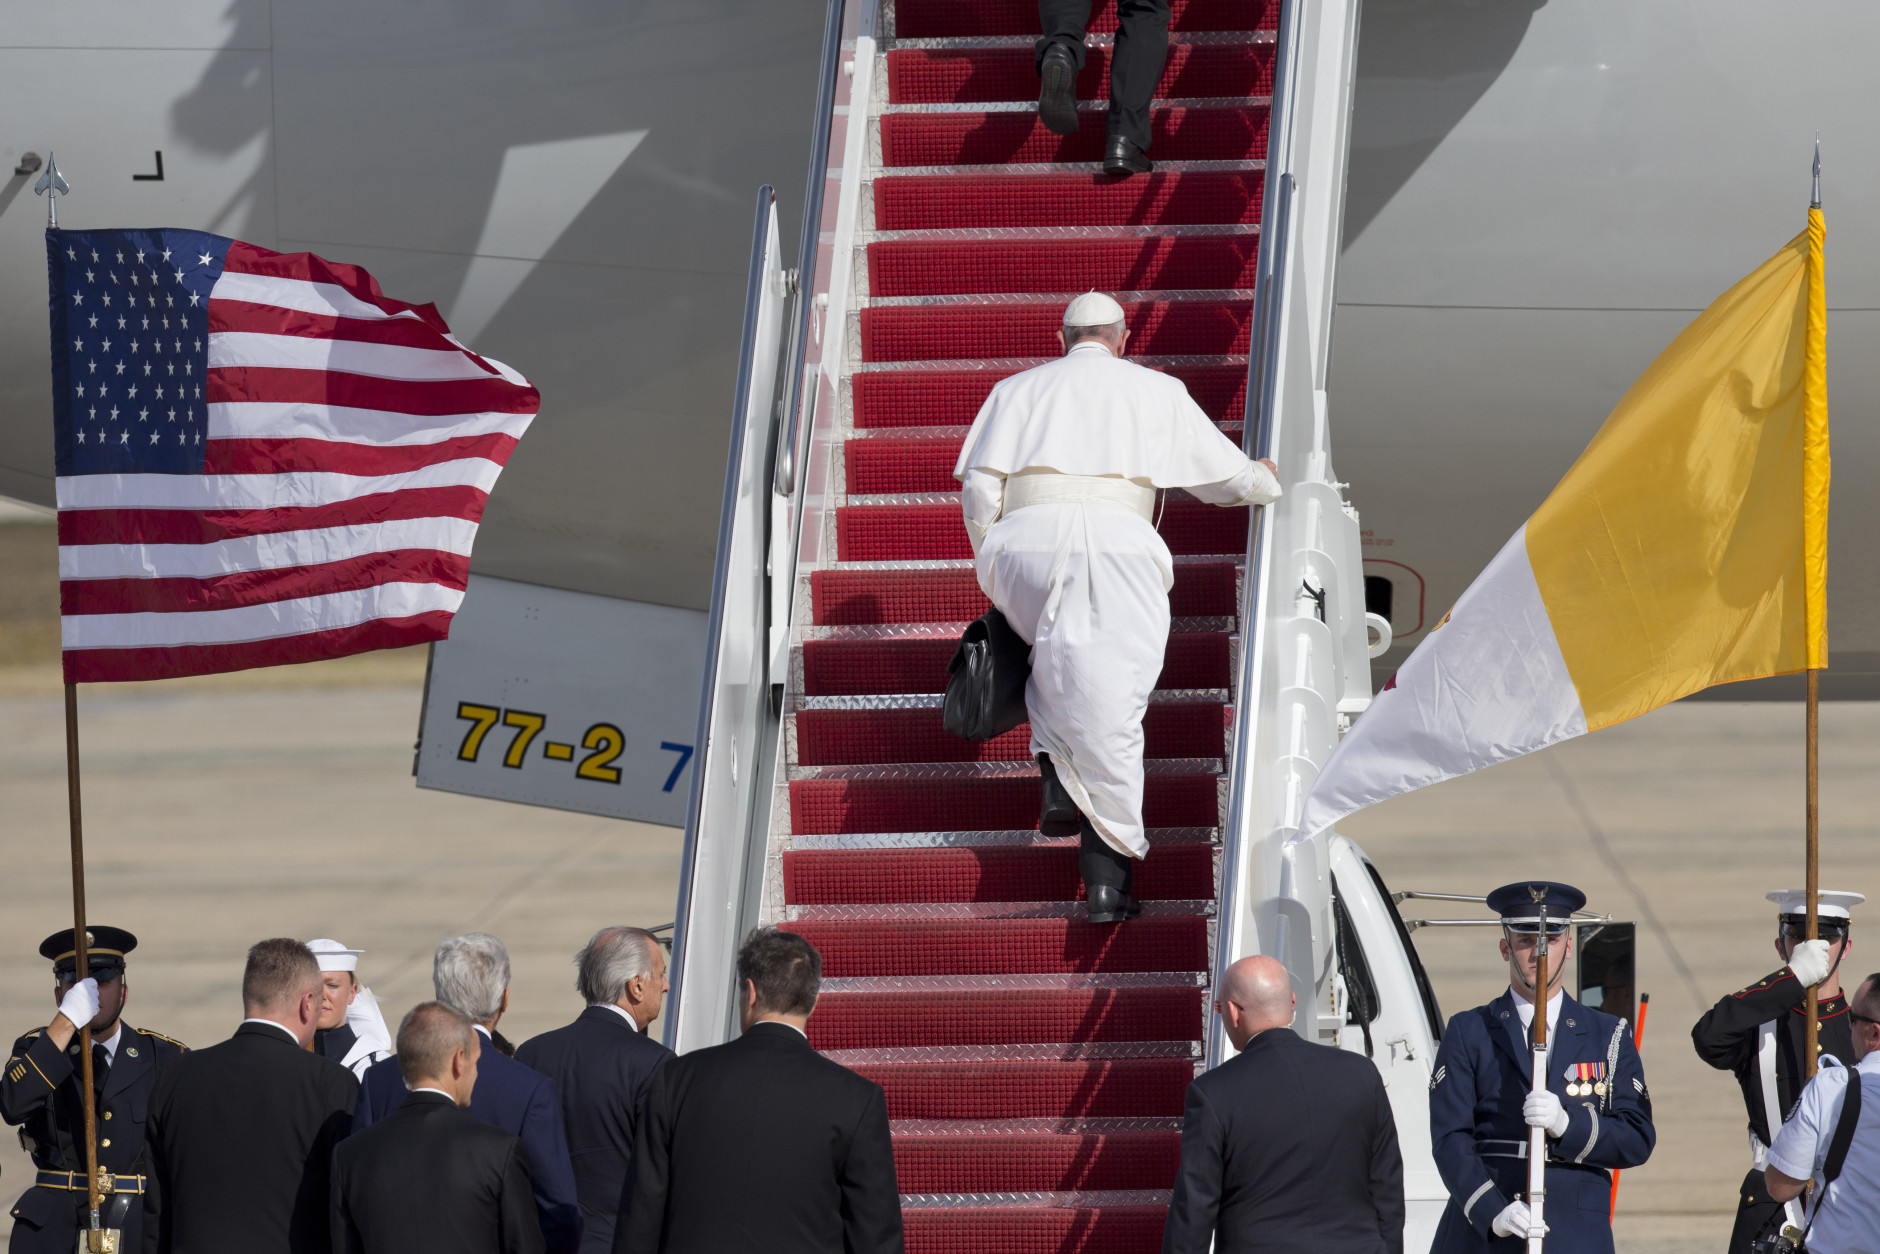 Pope Francis carries his own briefcase up the stairs before boarding his plane before leaving from Andrews Air Force Base, Md., en route to New York, Thursday, Sept. 24, 2015. (AP Photo/Jacquelyn Martin)